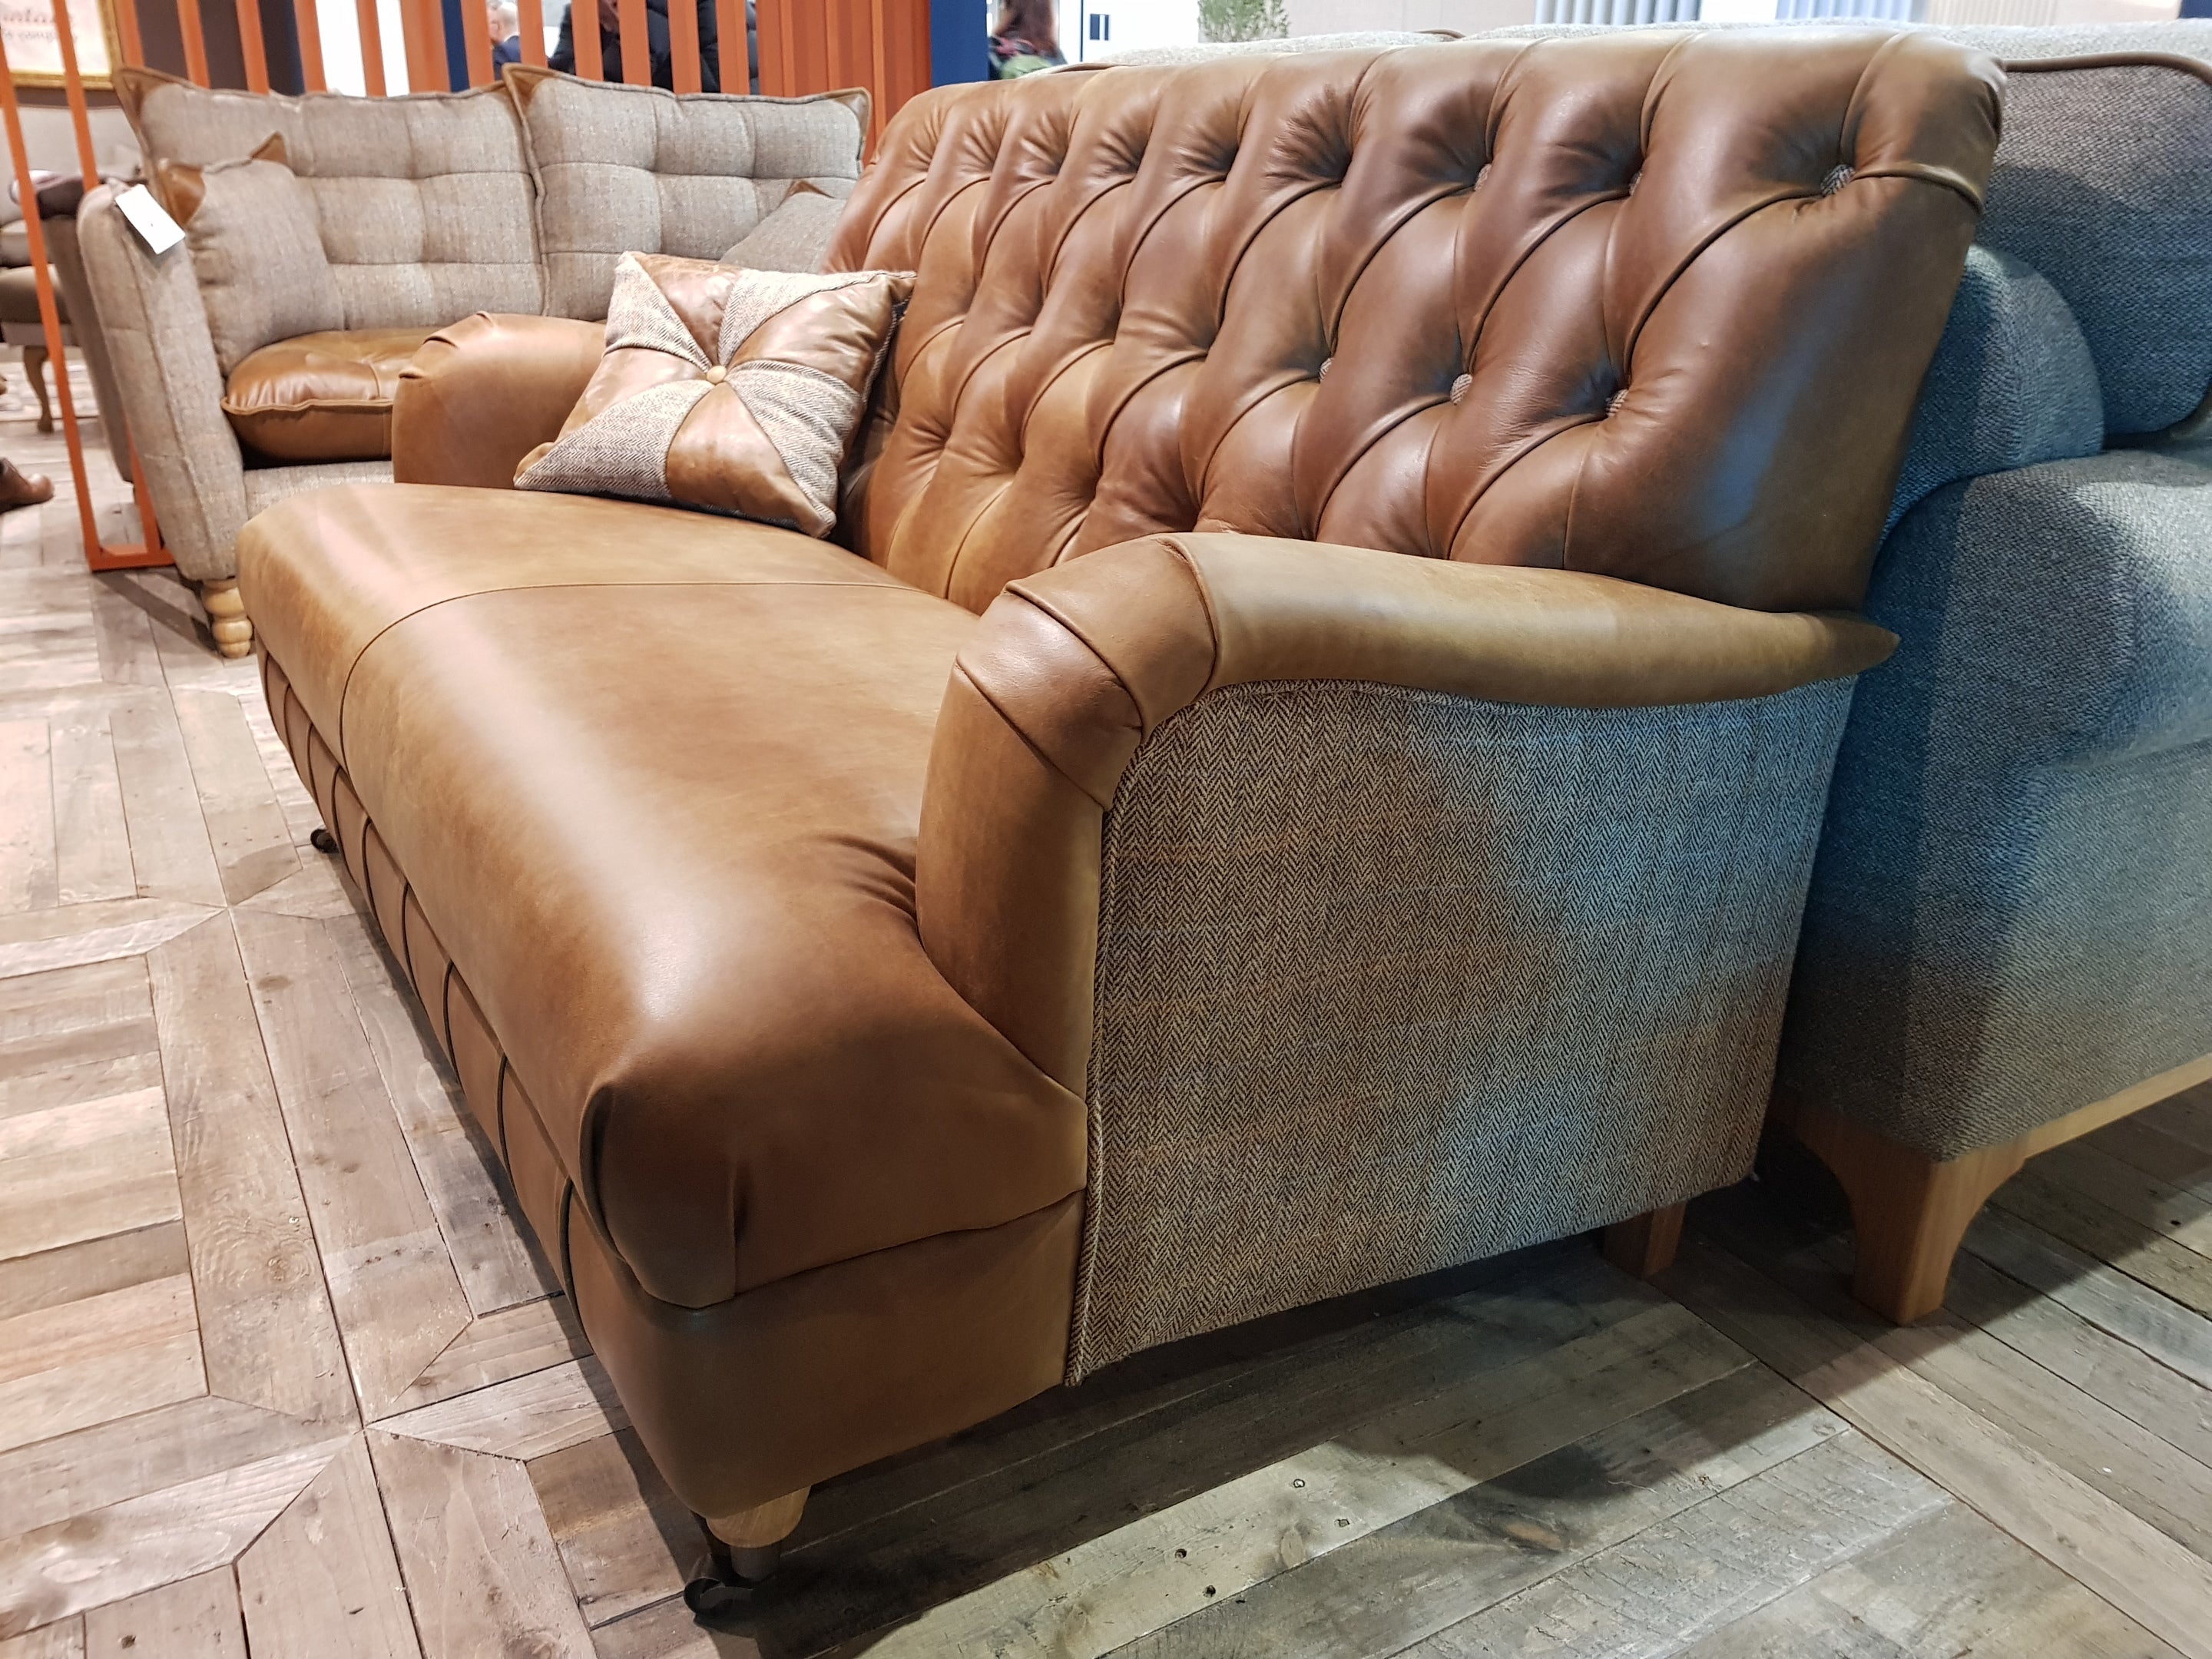 Jowler Harris Tweed and Leather Sofas.